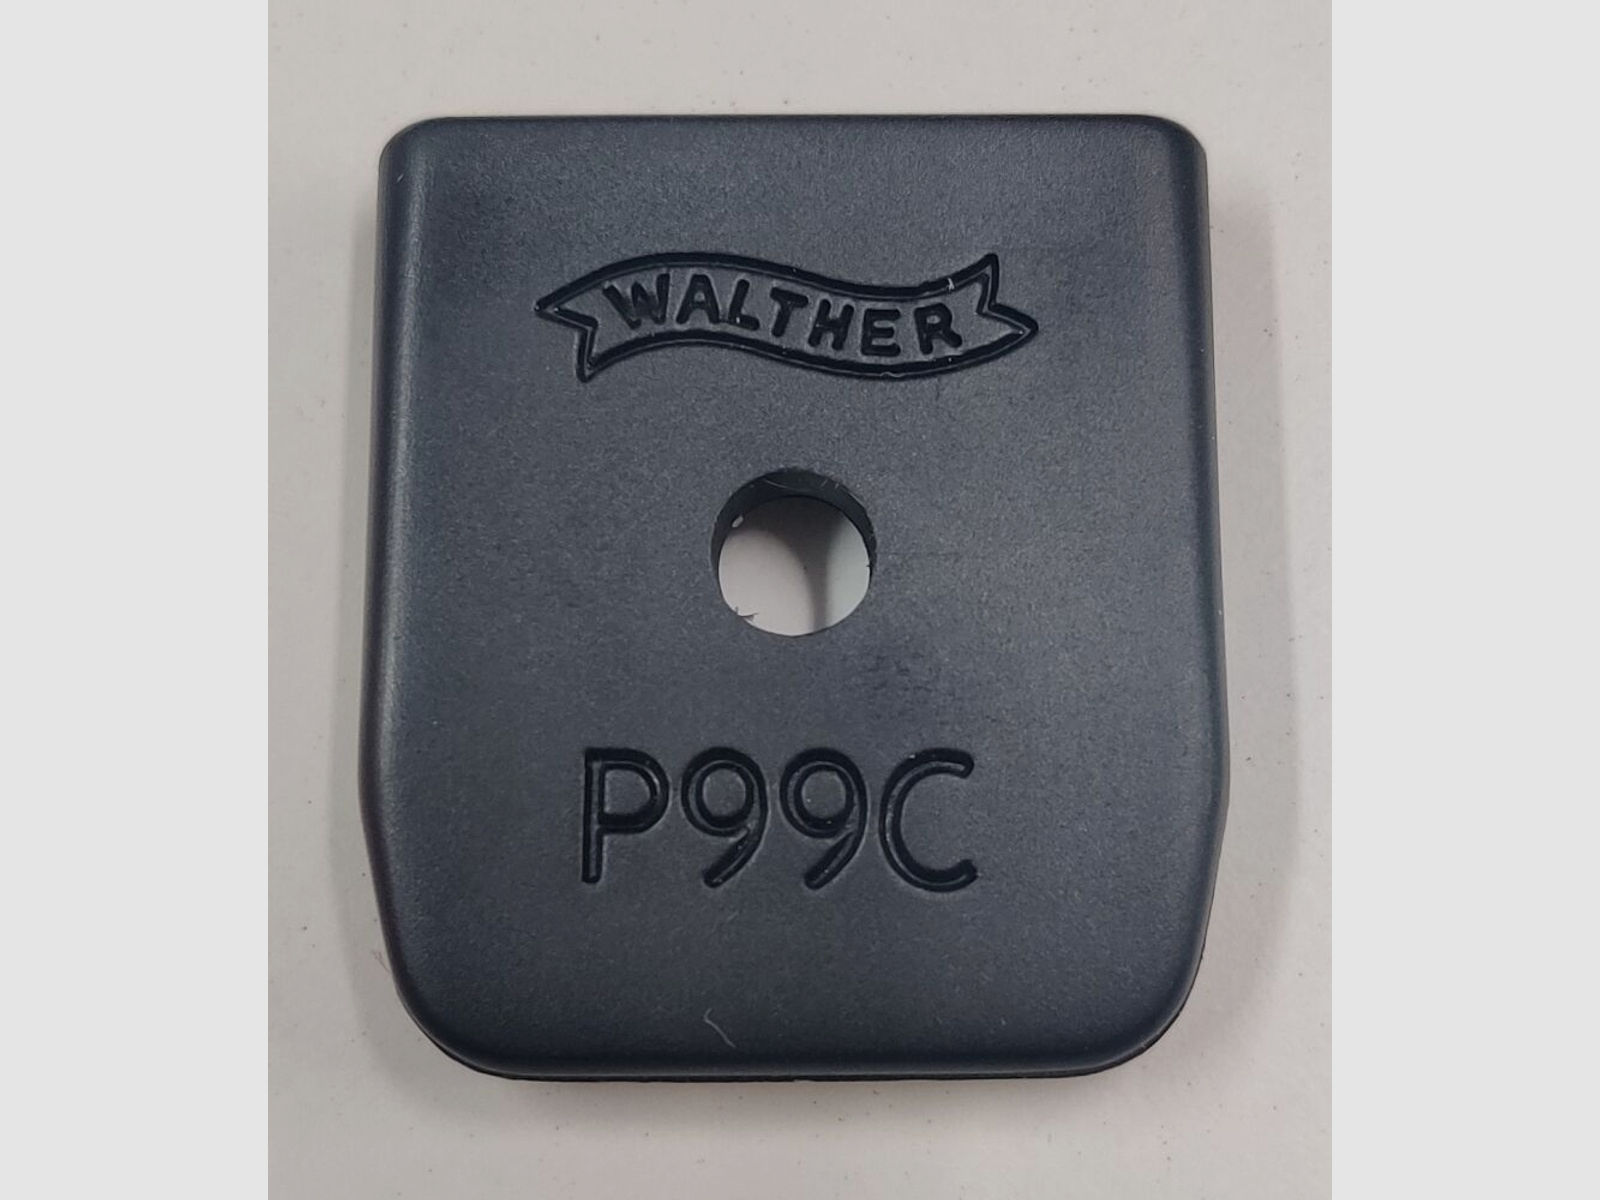 Carl Walther	 P99C / P99 Compact